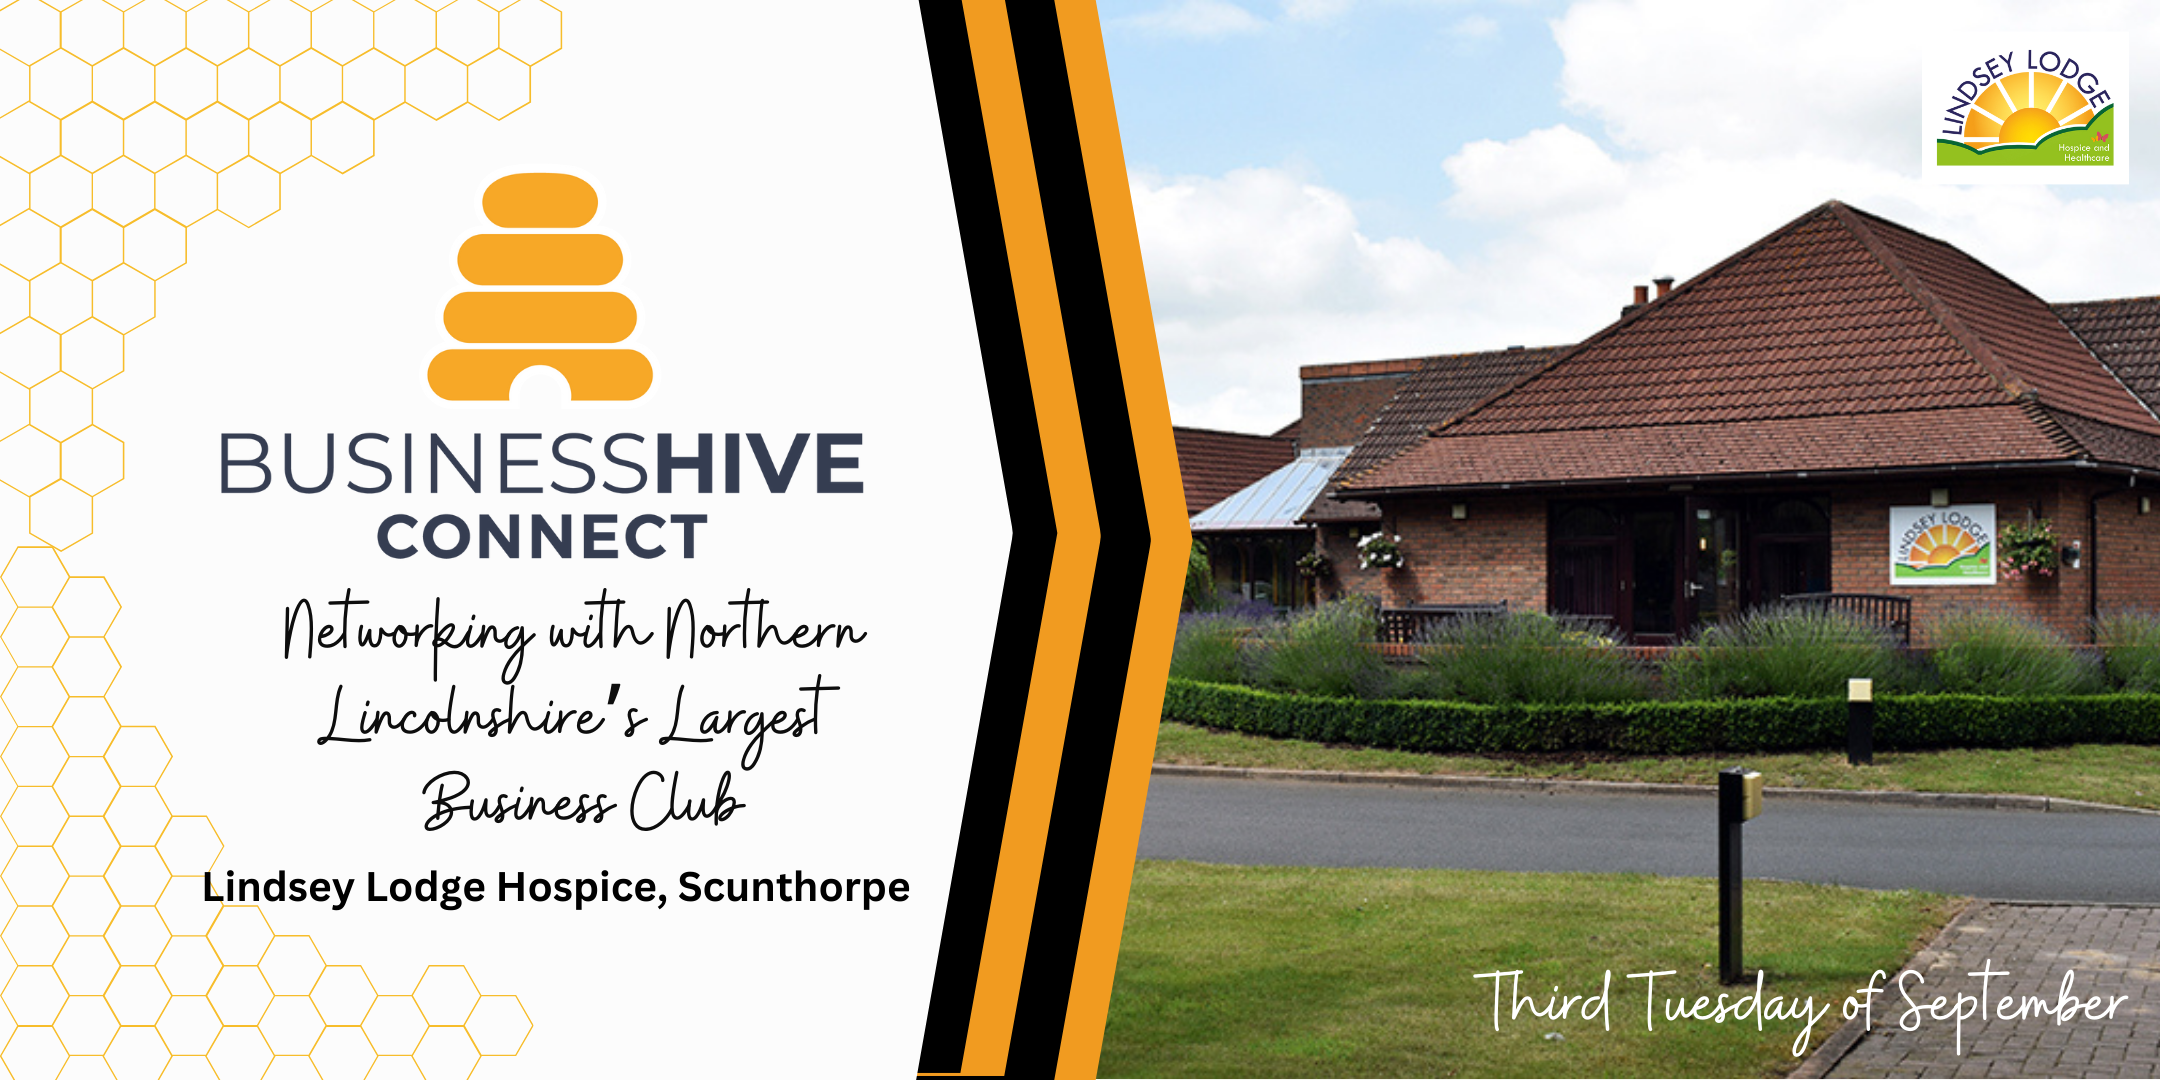 Join "Business Hive Connect" at Lindsey Lodge Hospice in Scunthorpe for an unparalleled networking event with Northern Lincolnshire’s largest business club on the third Tuesday of September.